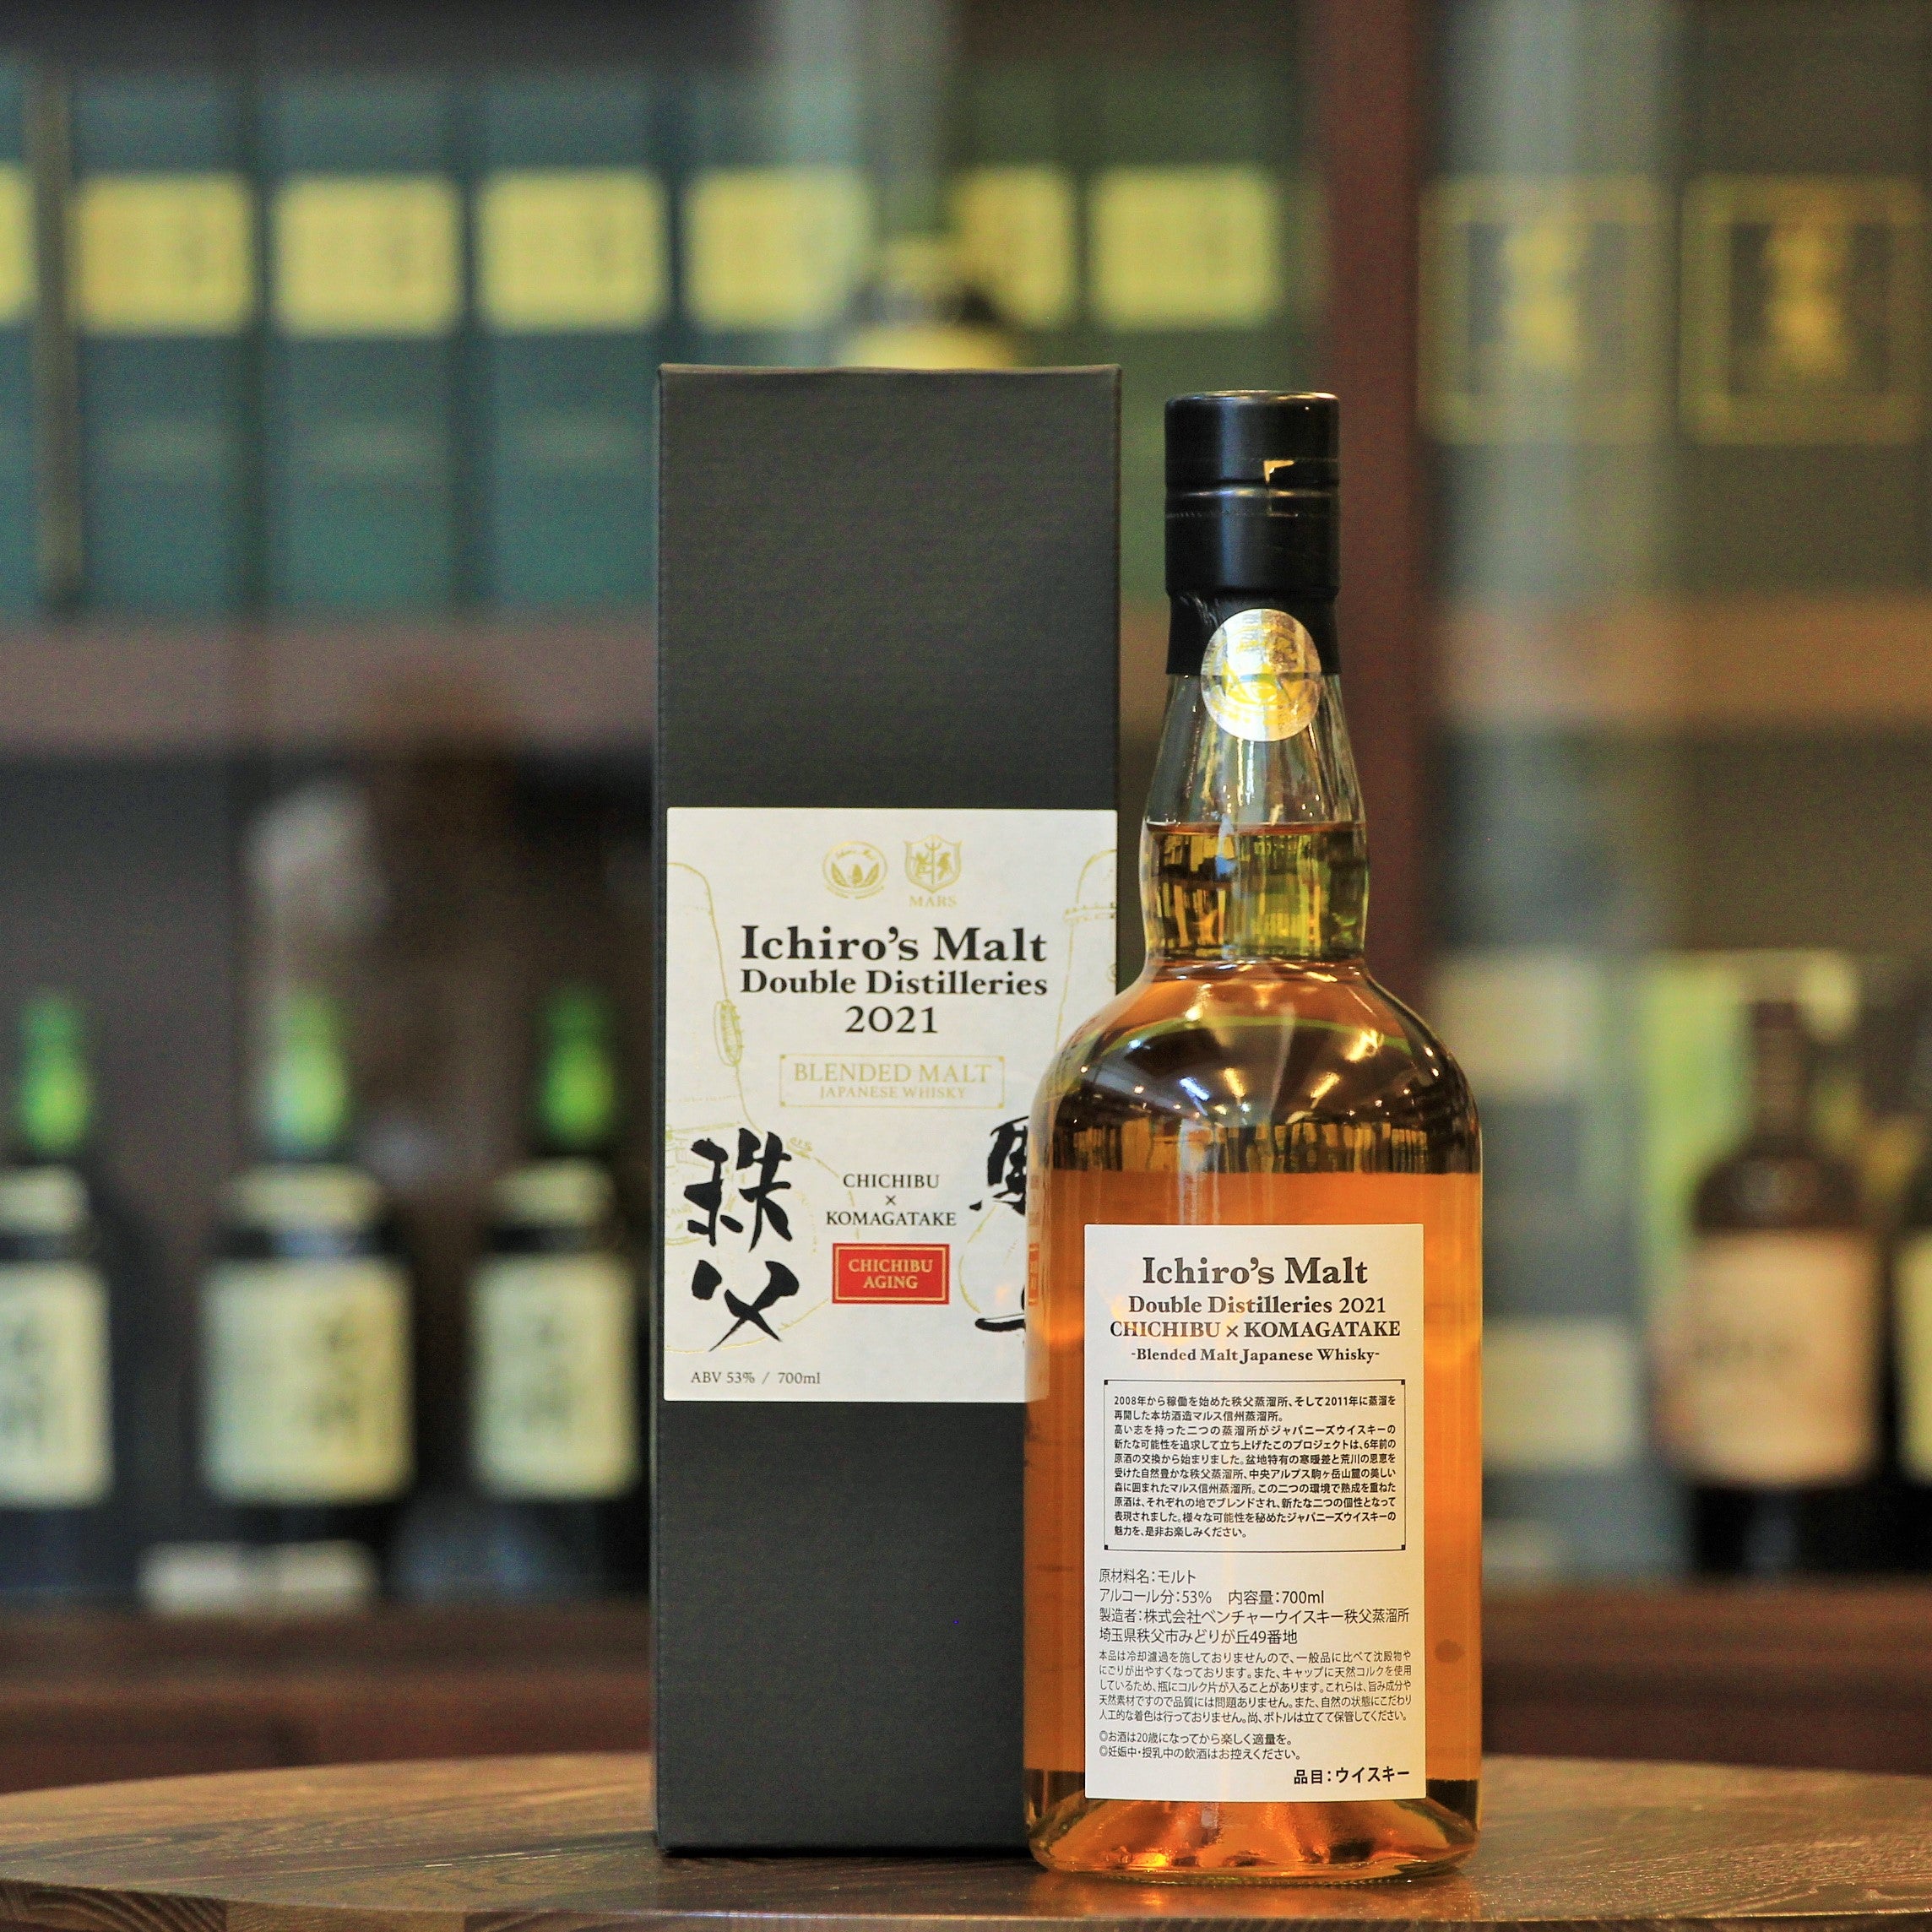 This is a special bottling released by the Chichibu Distillery and is a vatting of malt from two distilleries, "Chichibu" and "Komagatake", which has been matured at the Chichibu Distillery in a variety of Bourbon Barrel, American White Oak and Sherry Oak for more than 5 years. In 2015, Venture Whisky (Chichibu) Distillery and Mars Shinshu Distillery began exchanging their new make spirit, which was subsequently matured in their respective locations. 10,200 bottles were released.